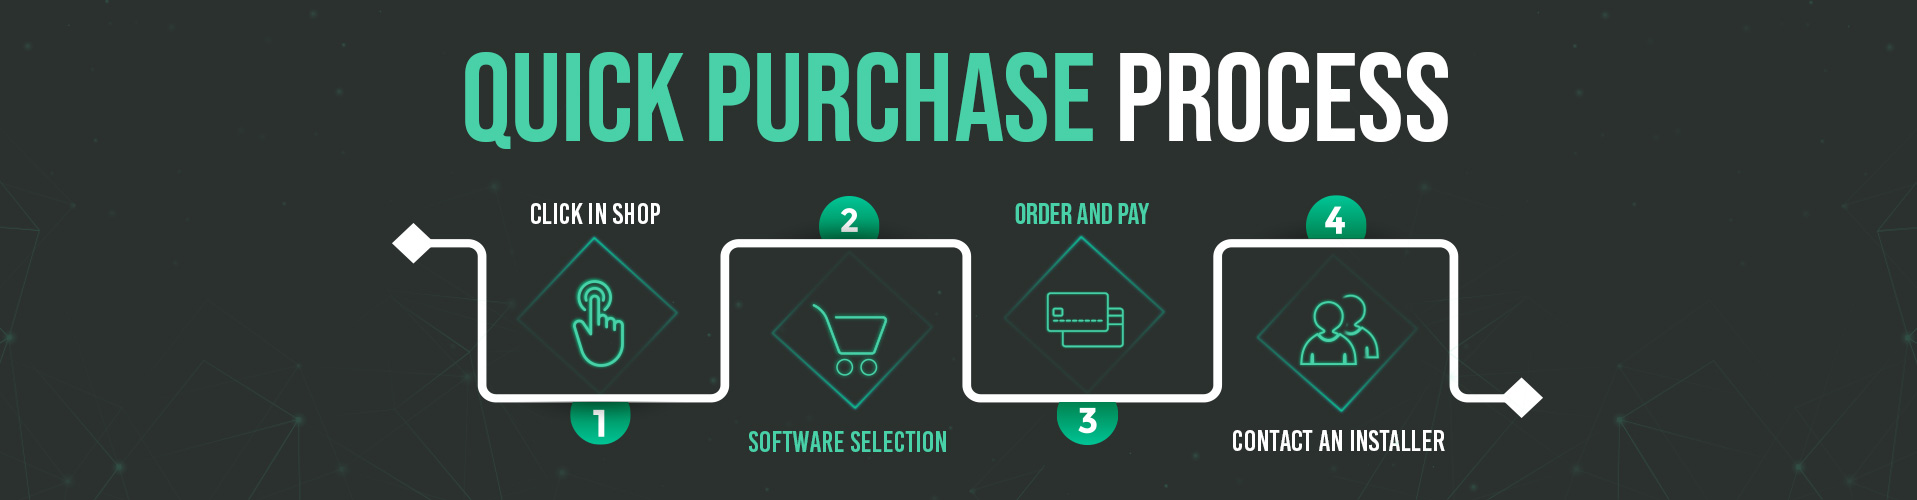 quick purchase process